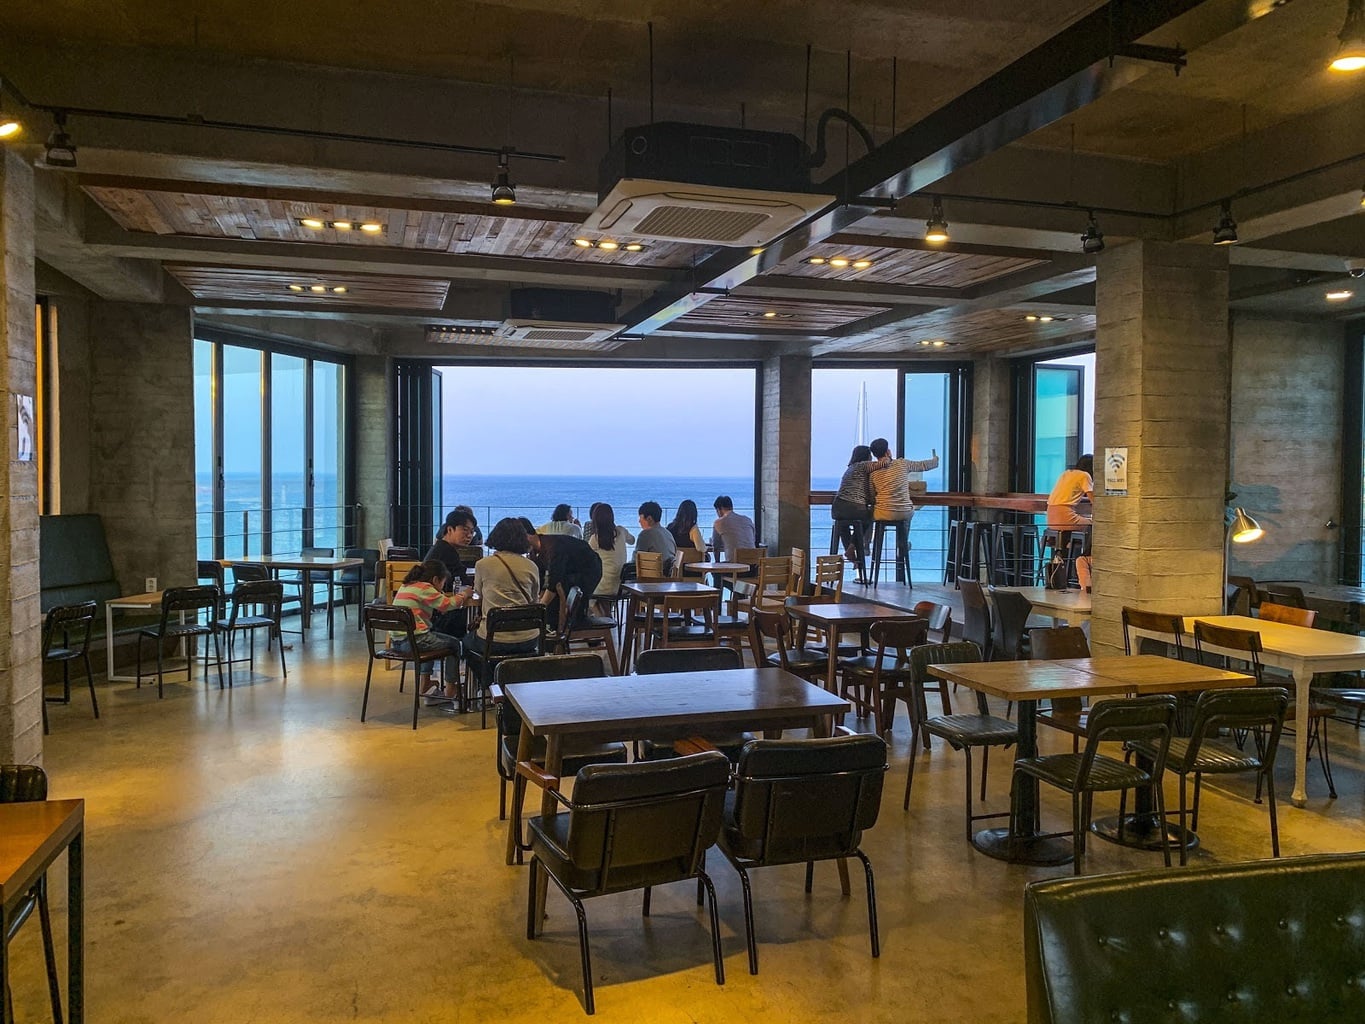 Coffee shops with ocean views, one of my personal favorite South Korean festivals